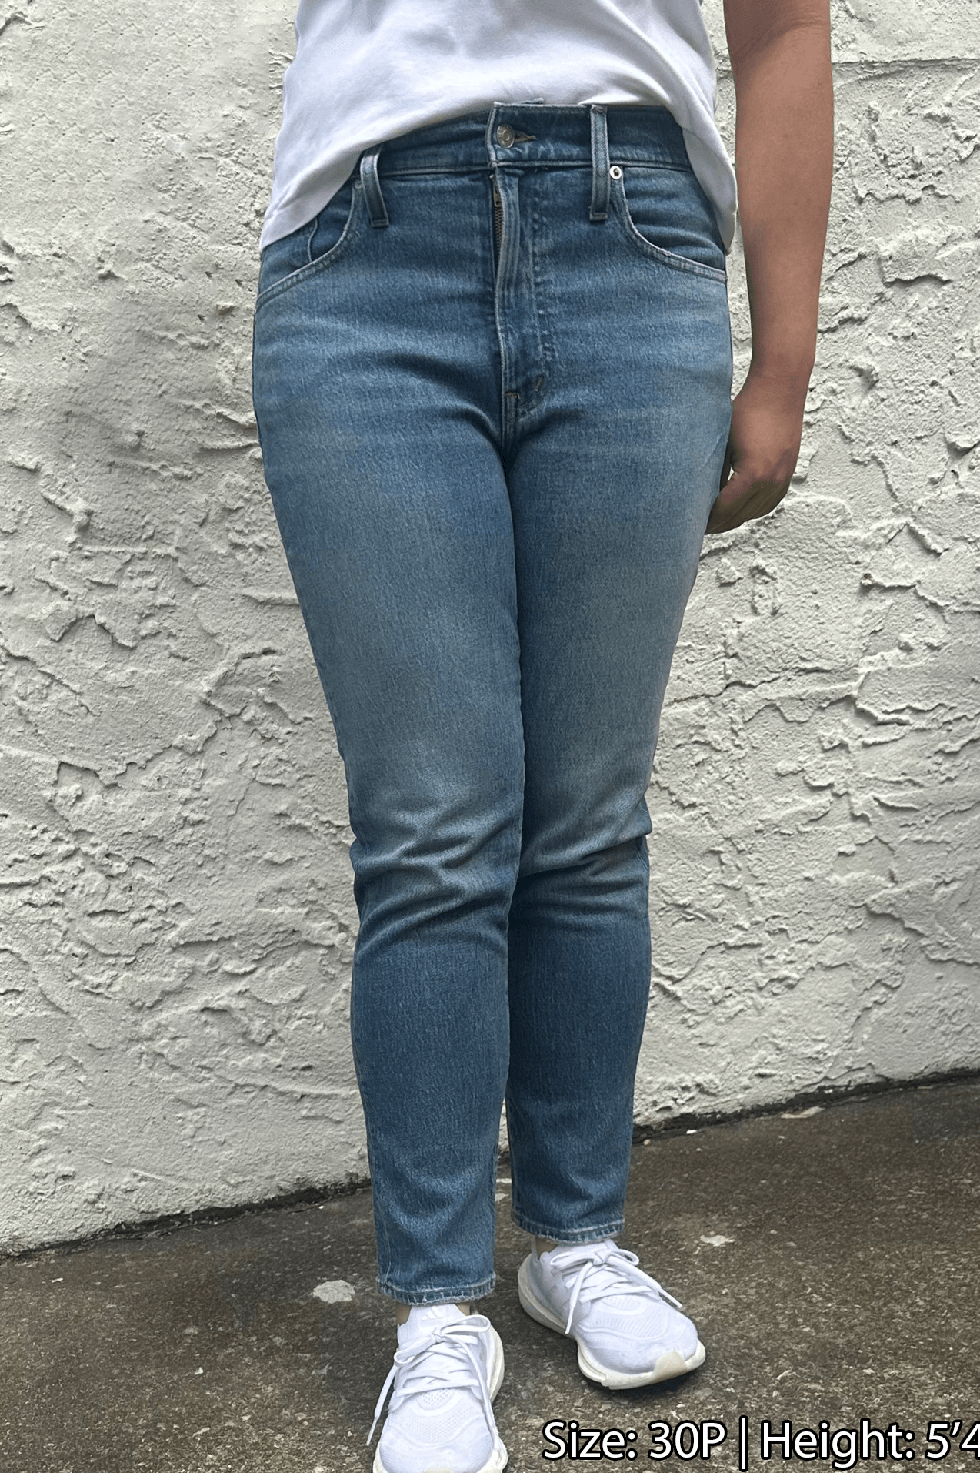 The Jeans Guide for Women 5 Feet and Under - Petite Dressing